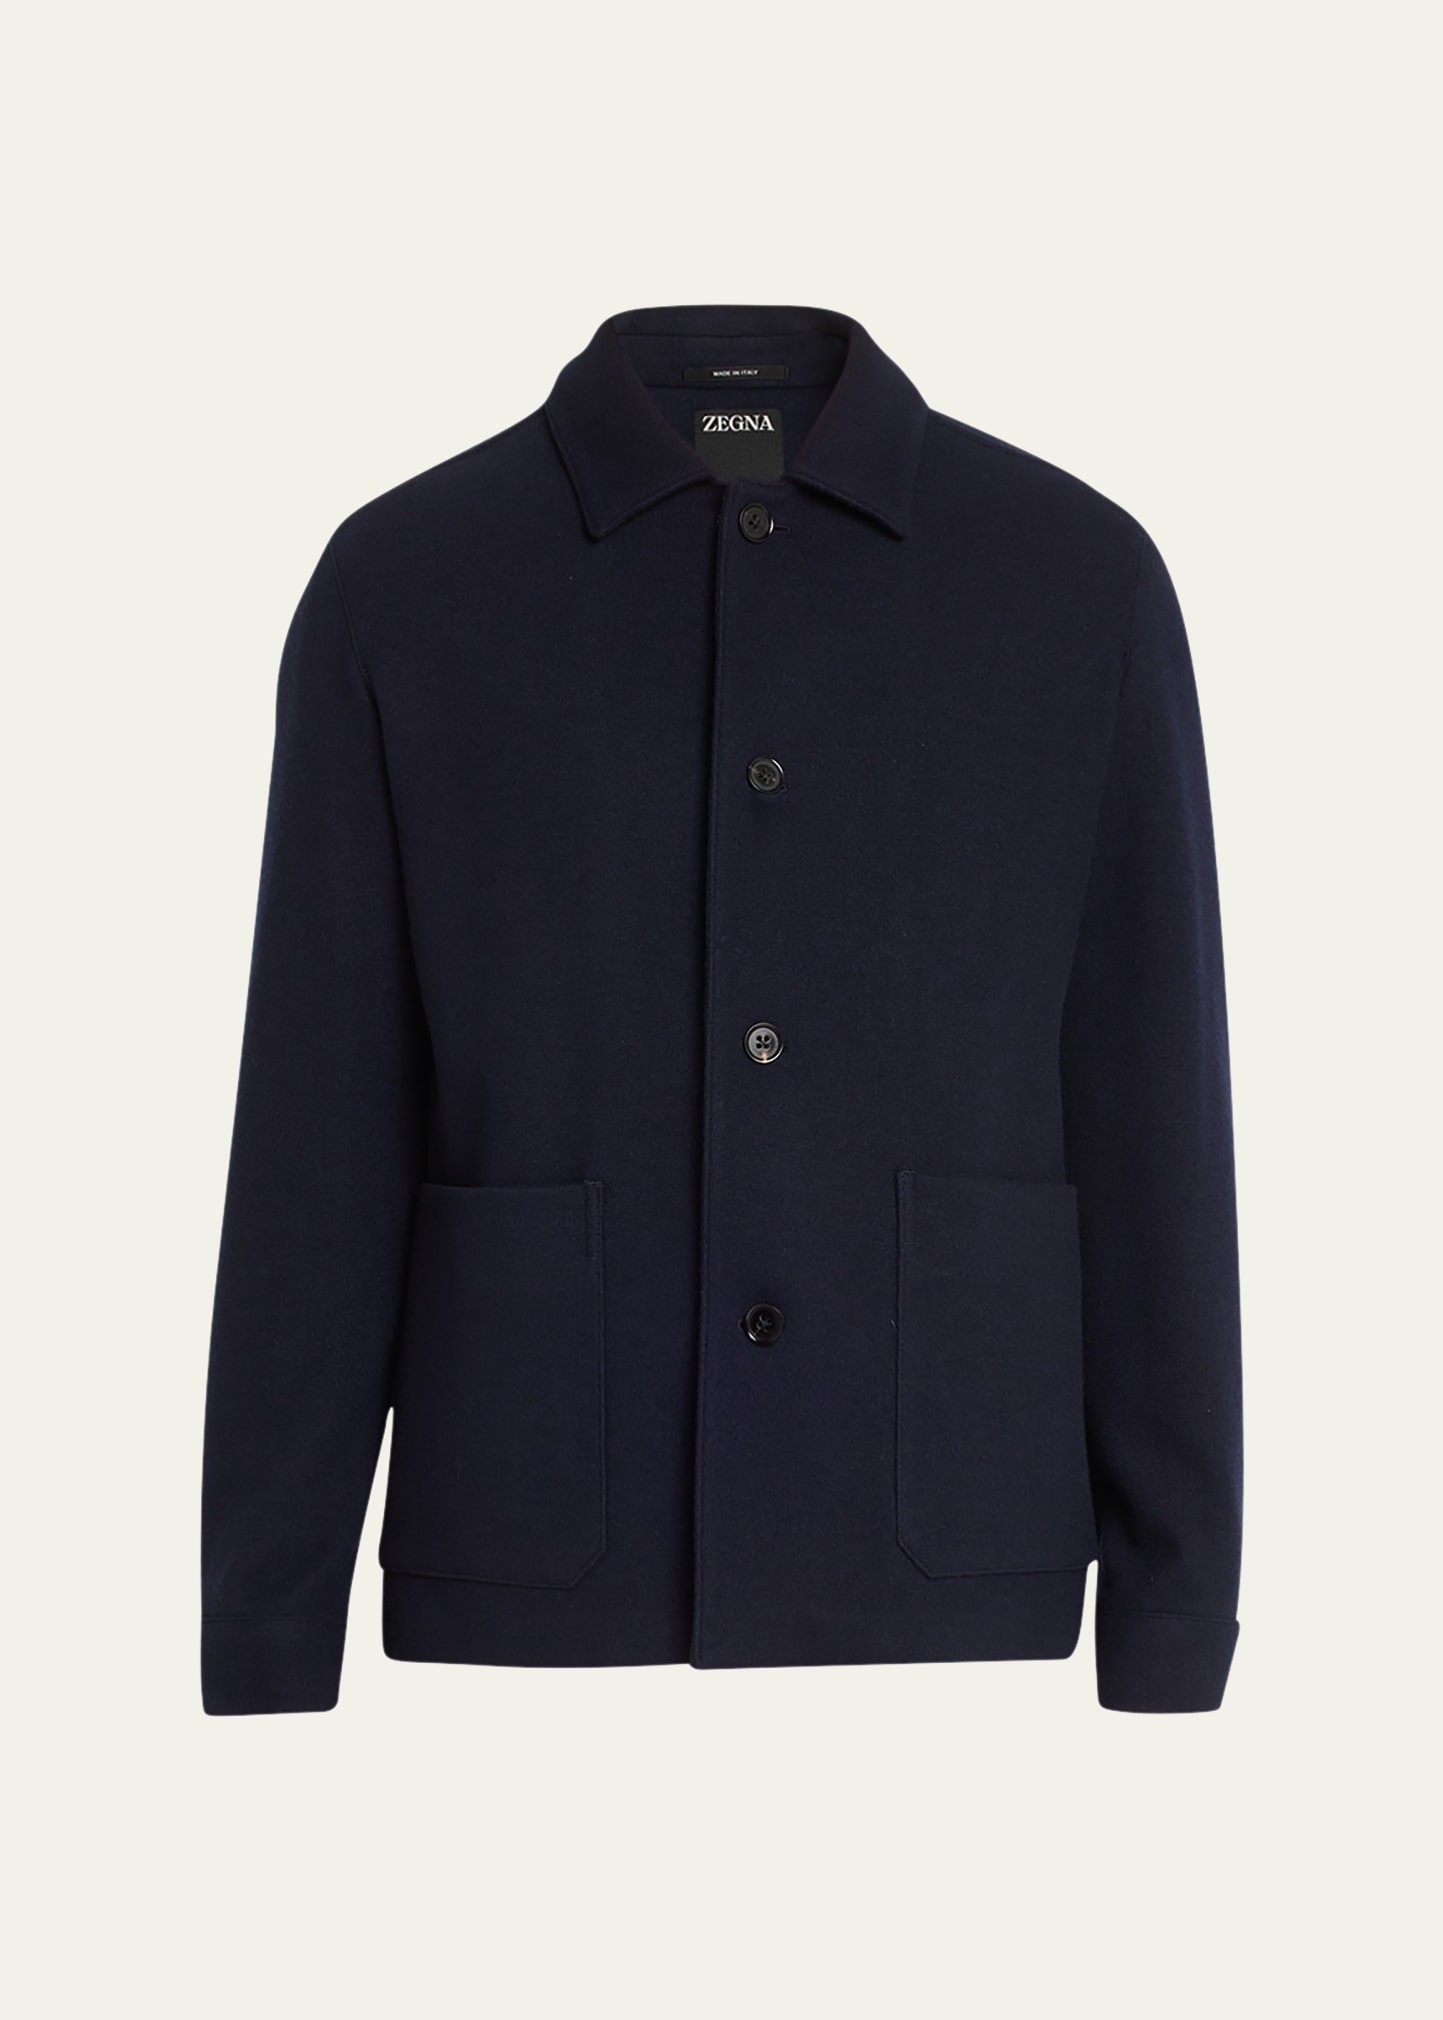 Zegna Men's Solid Cashmere Chore Jacket In Nvy Sld